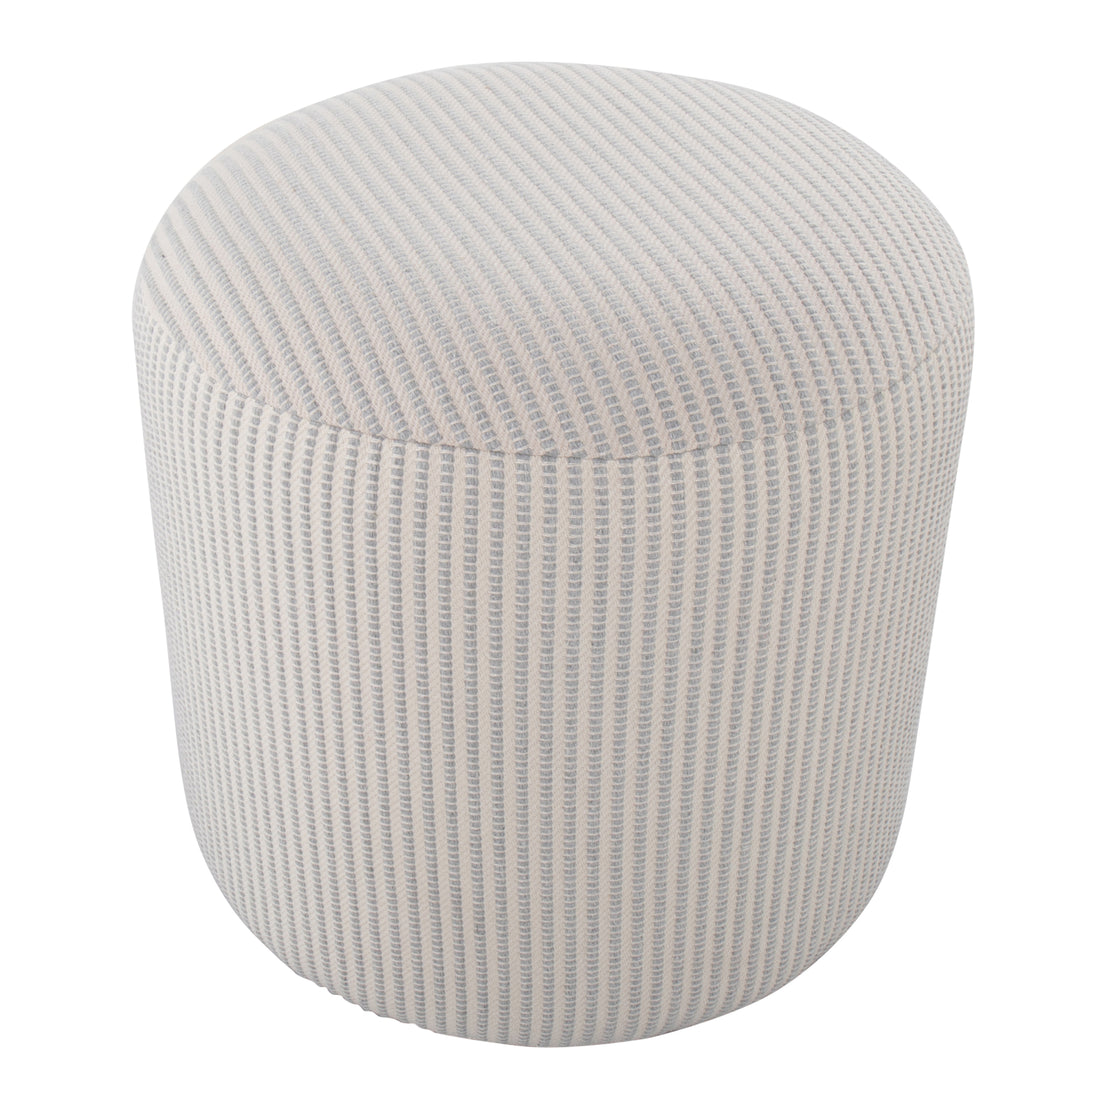 Round Pouf in Knitted Grey and White Fabric by